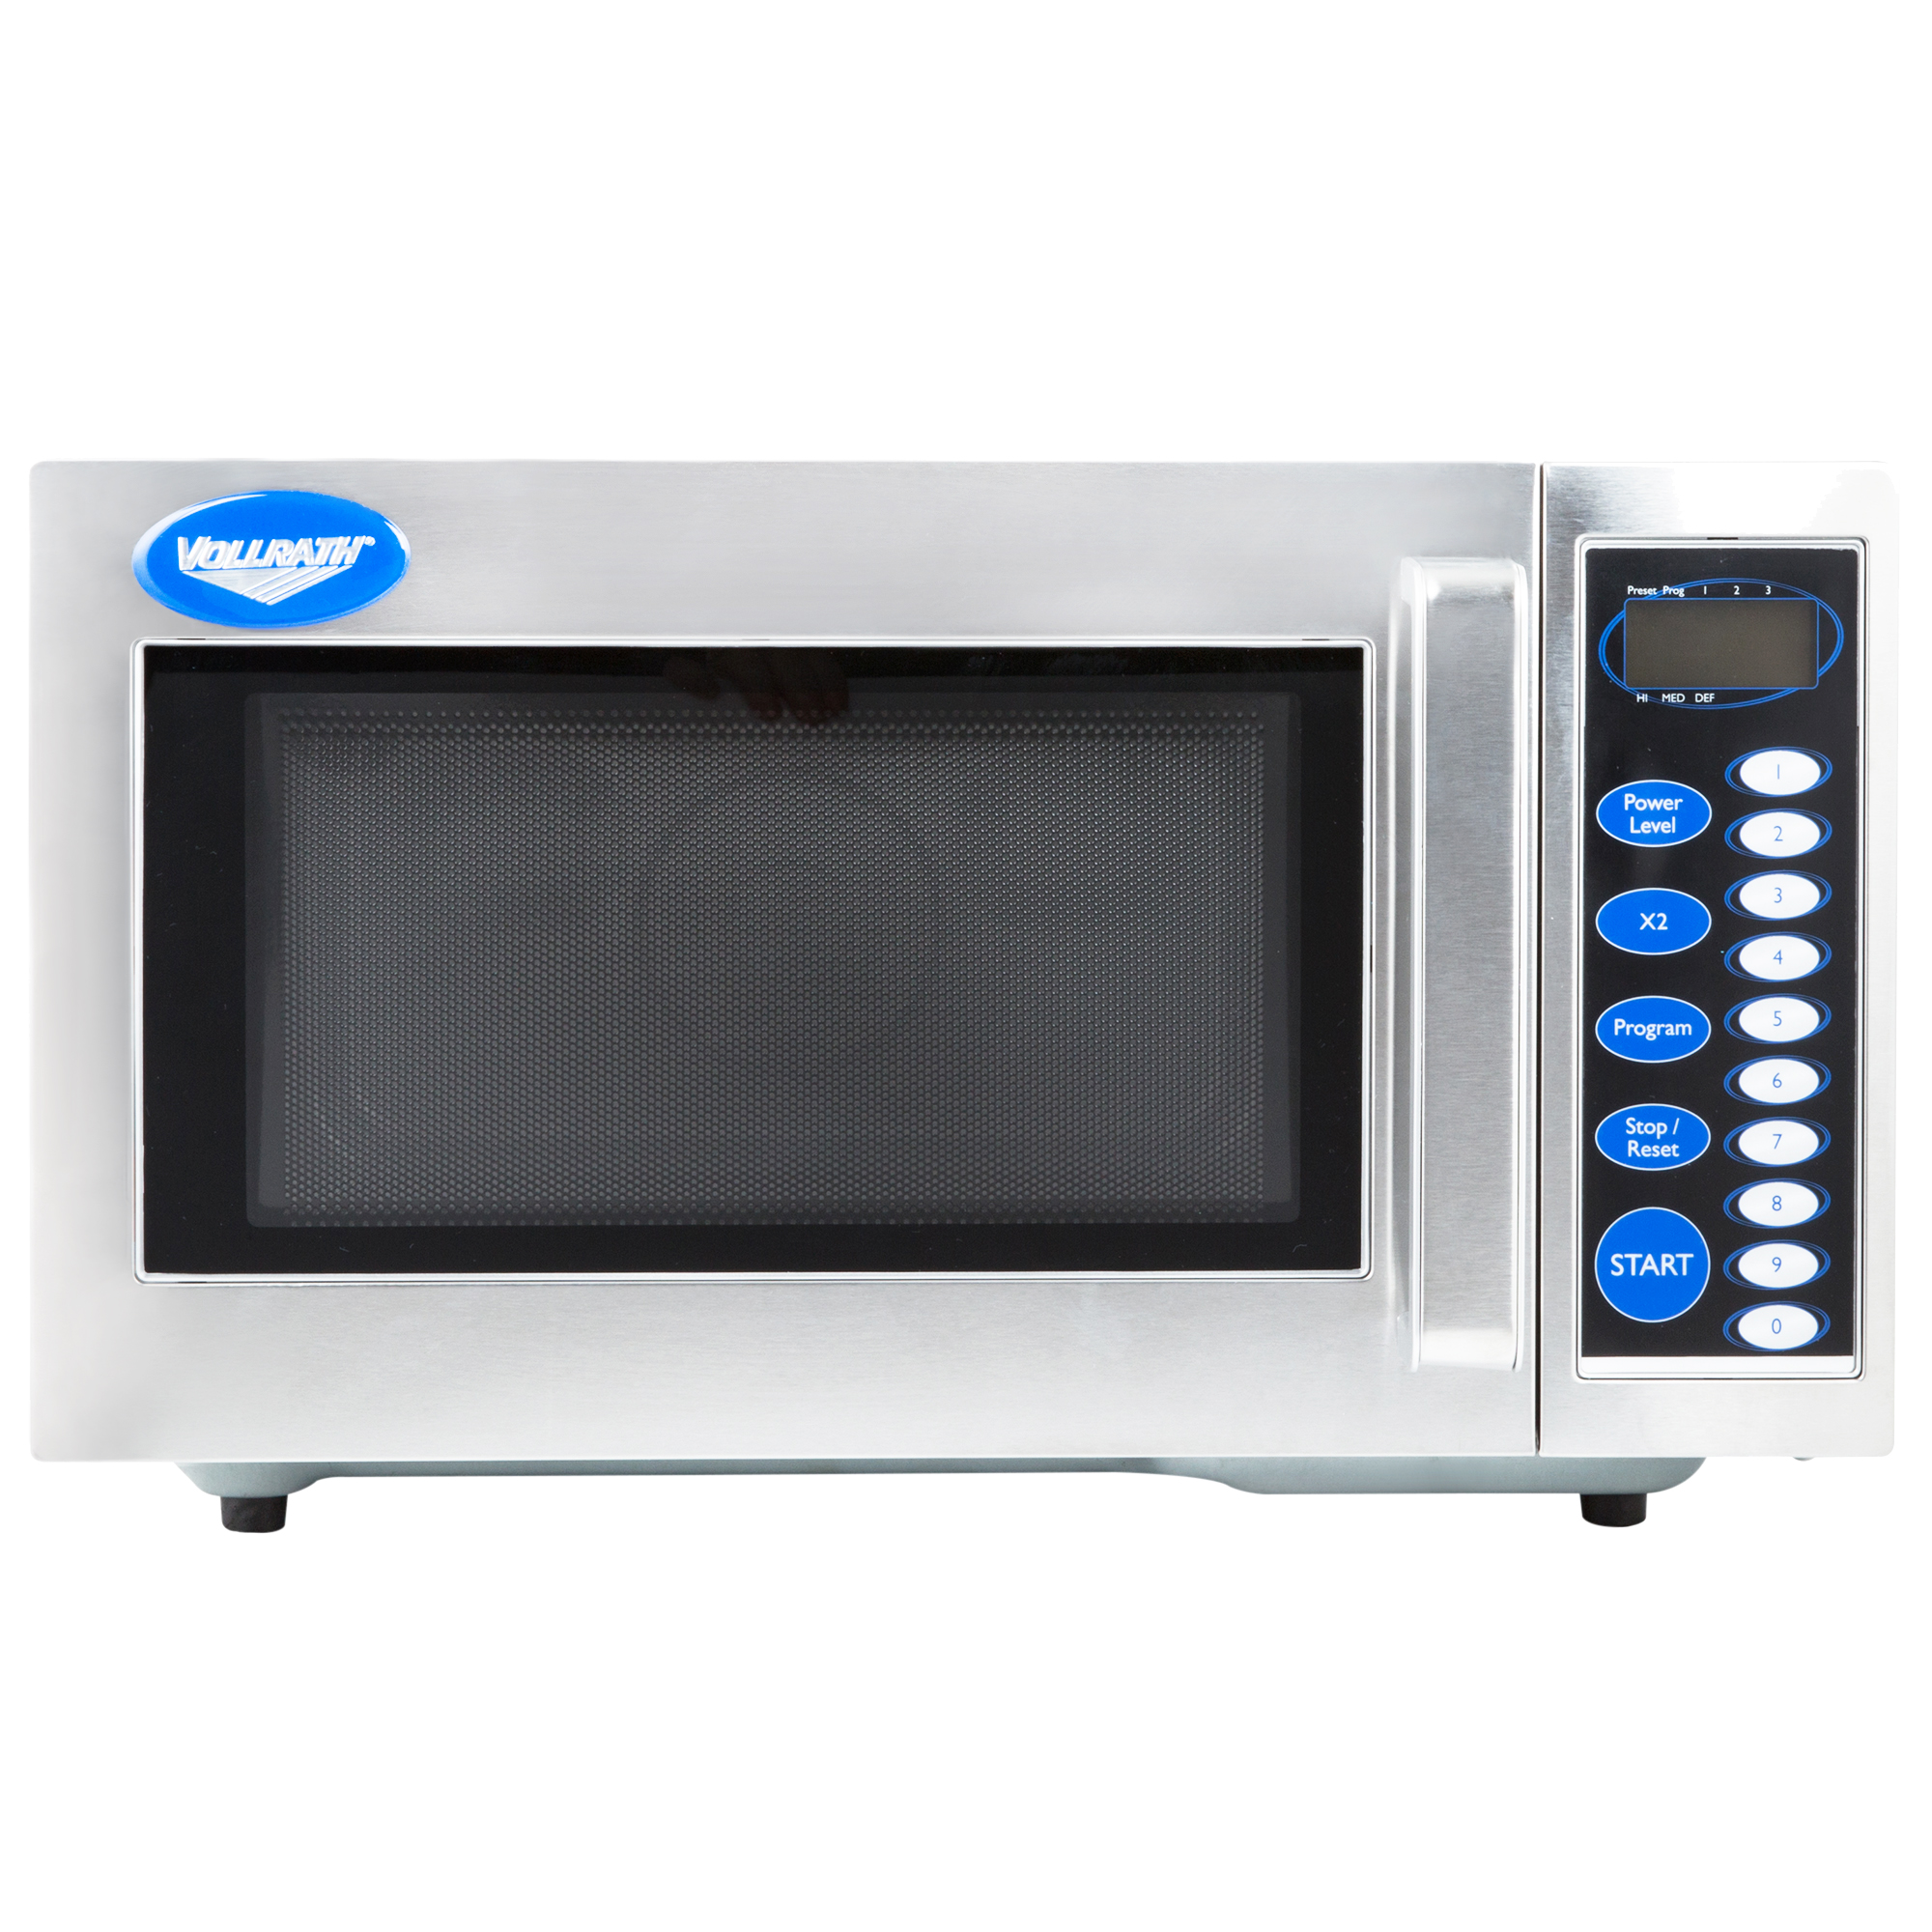 120-volt microwave oven with digital controls - Vollrath Foodservice